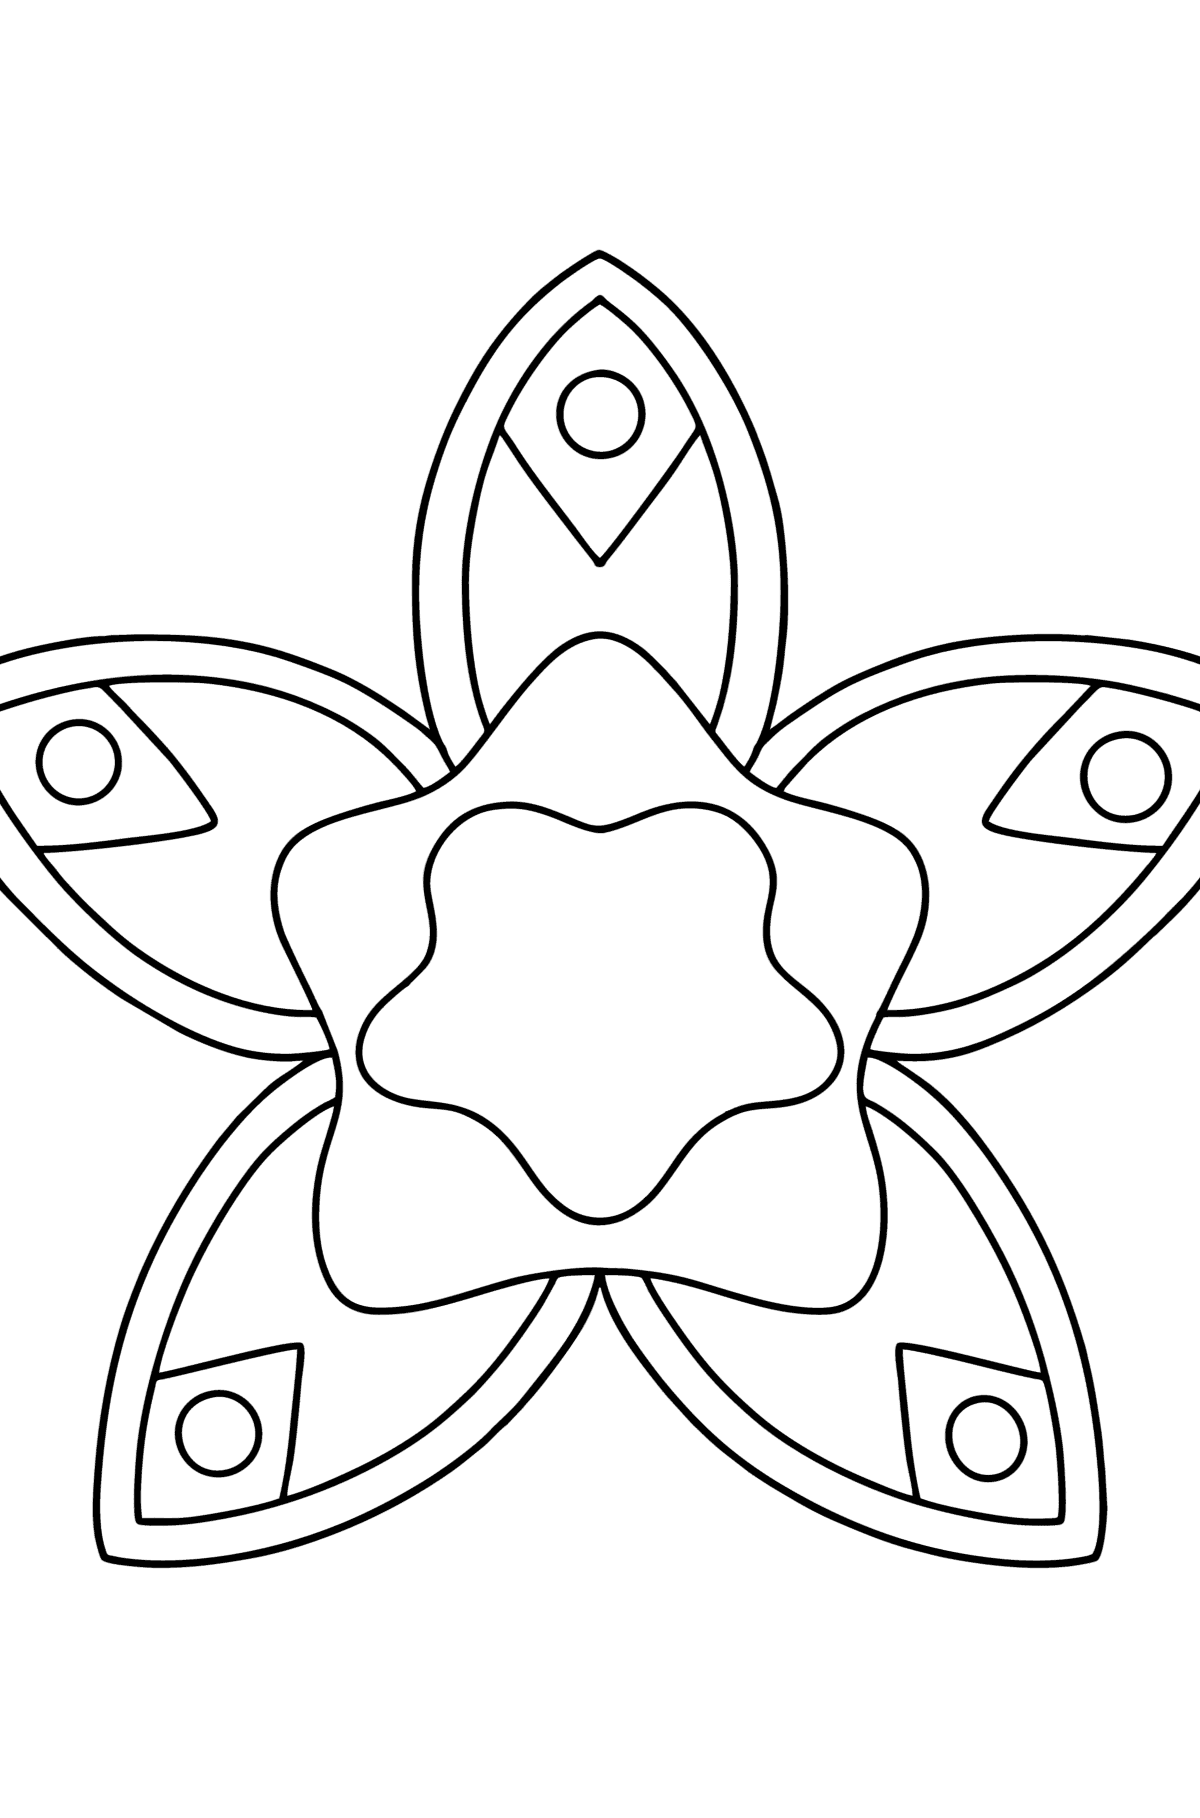 Simple Flower Anti stress coloring page - Coloring Pages for Kids